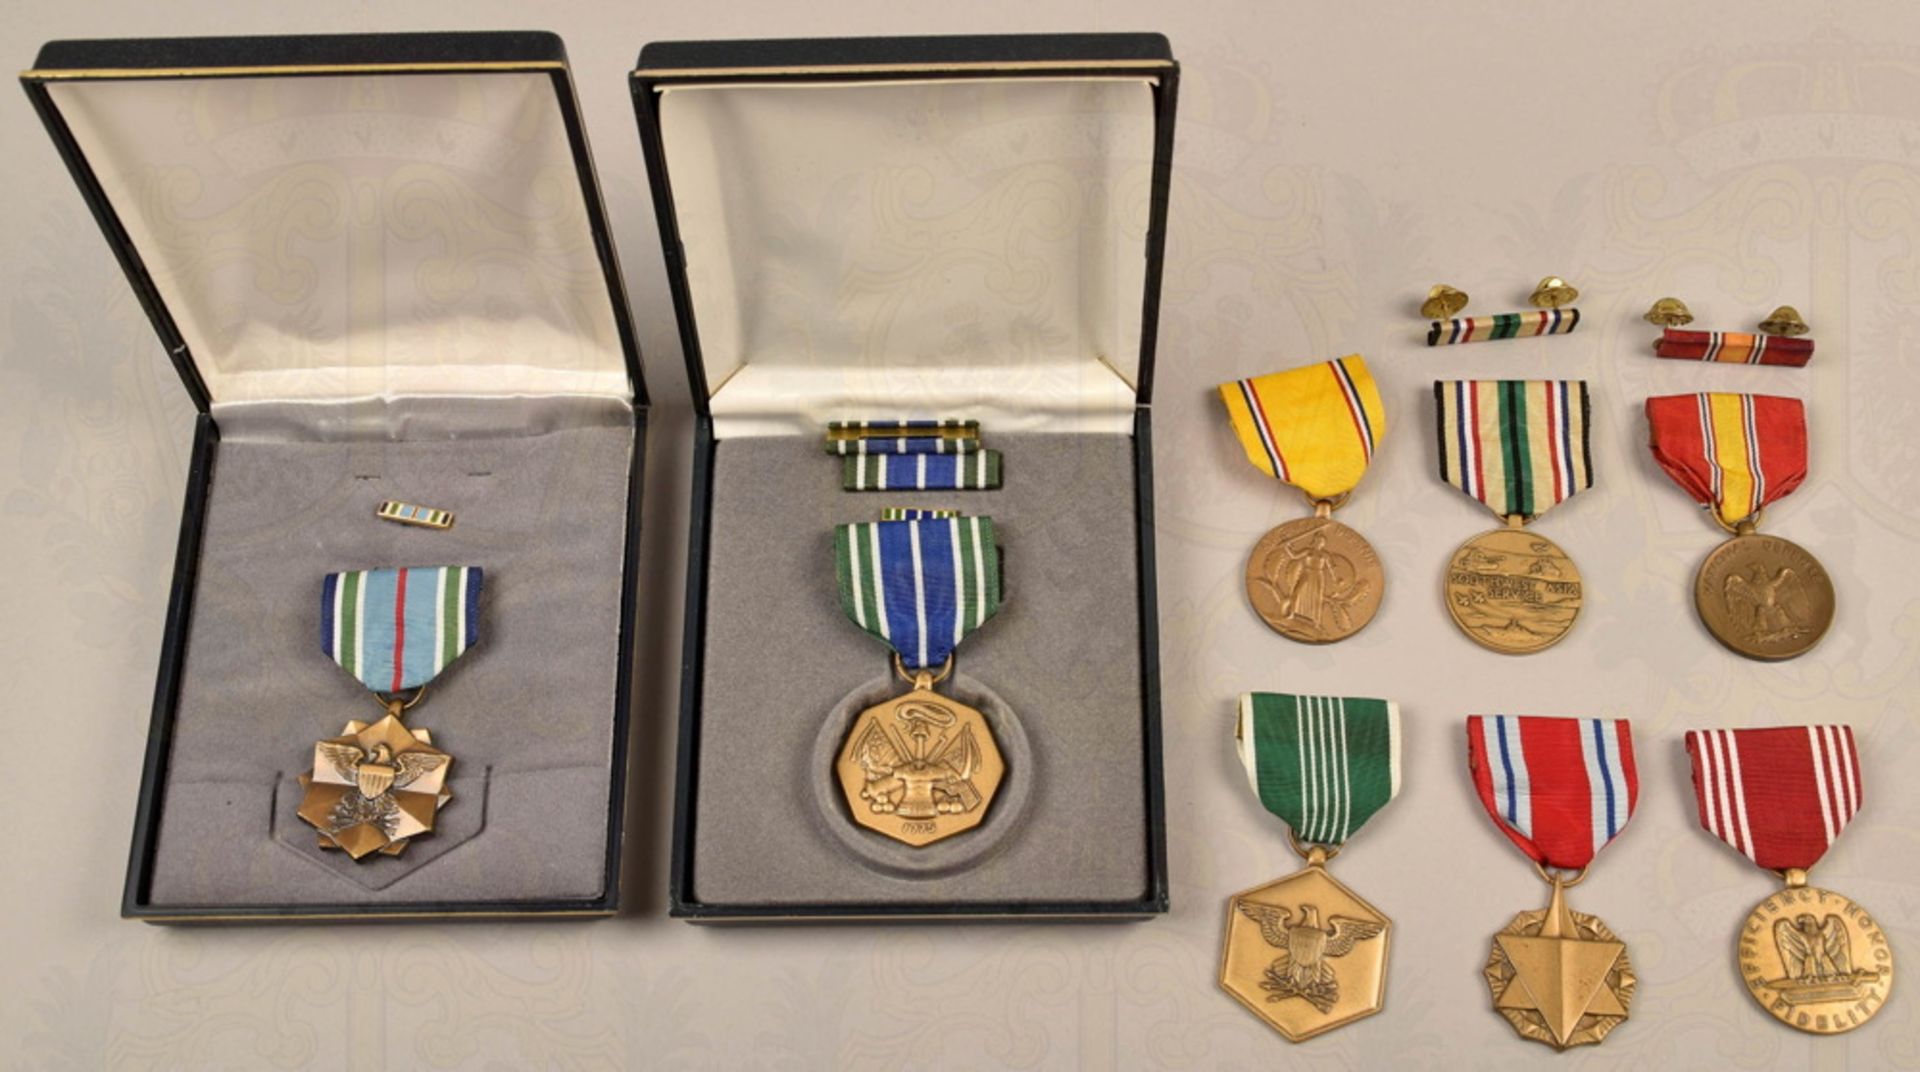 8 United States orders and awards